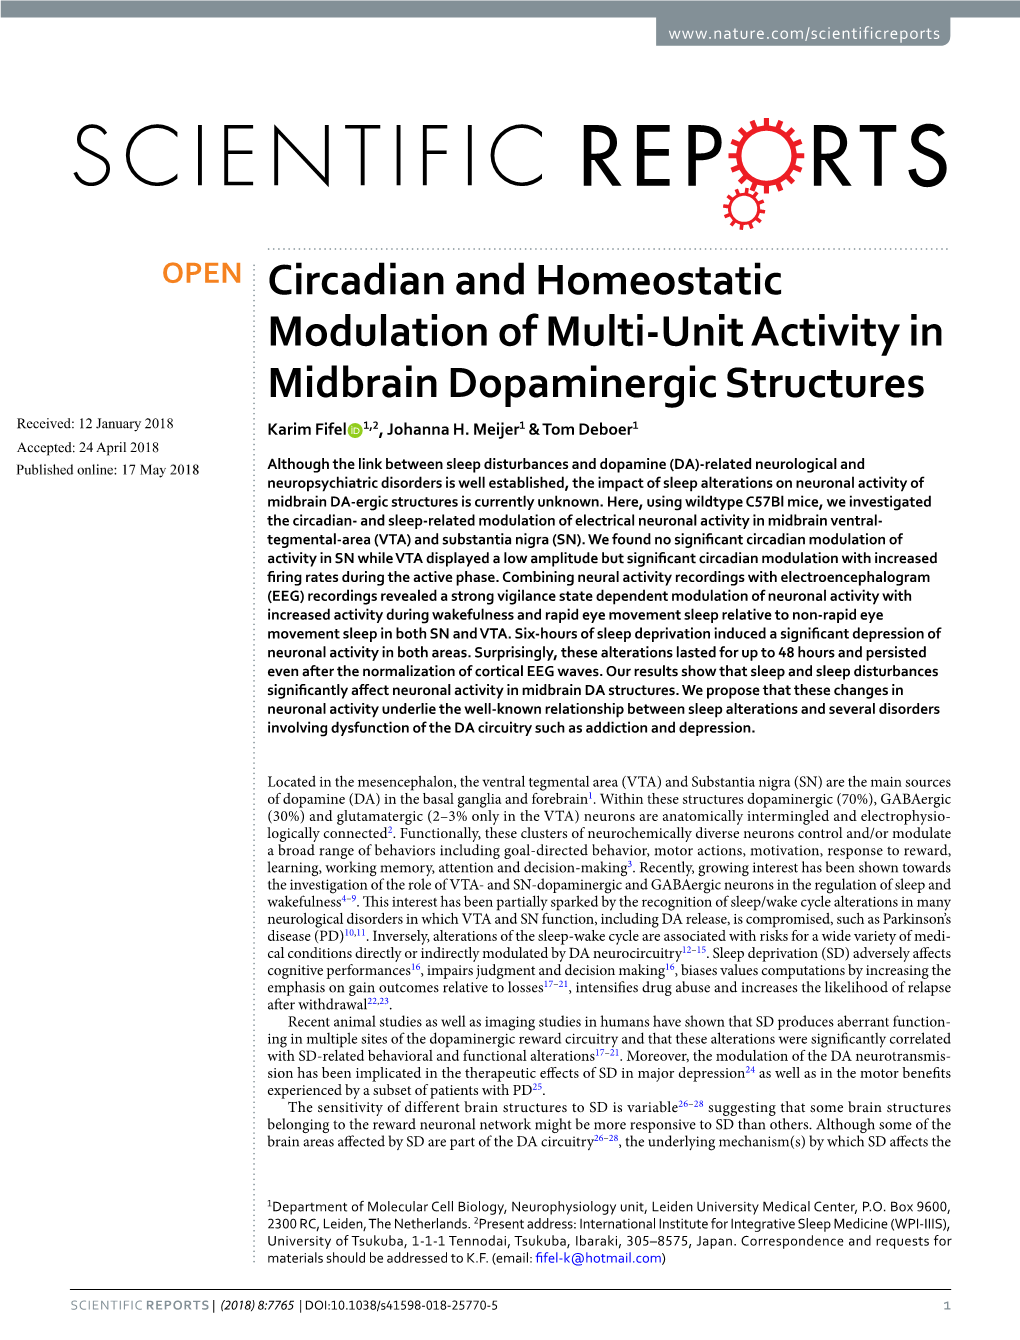 Circadian and Homeostatic Modulation of Multi-Unit Activity in Midbrain Dopaminergic Structures Received: 12 January 2018 Karim Fifel 1,2, Johanna H